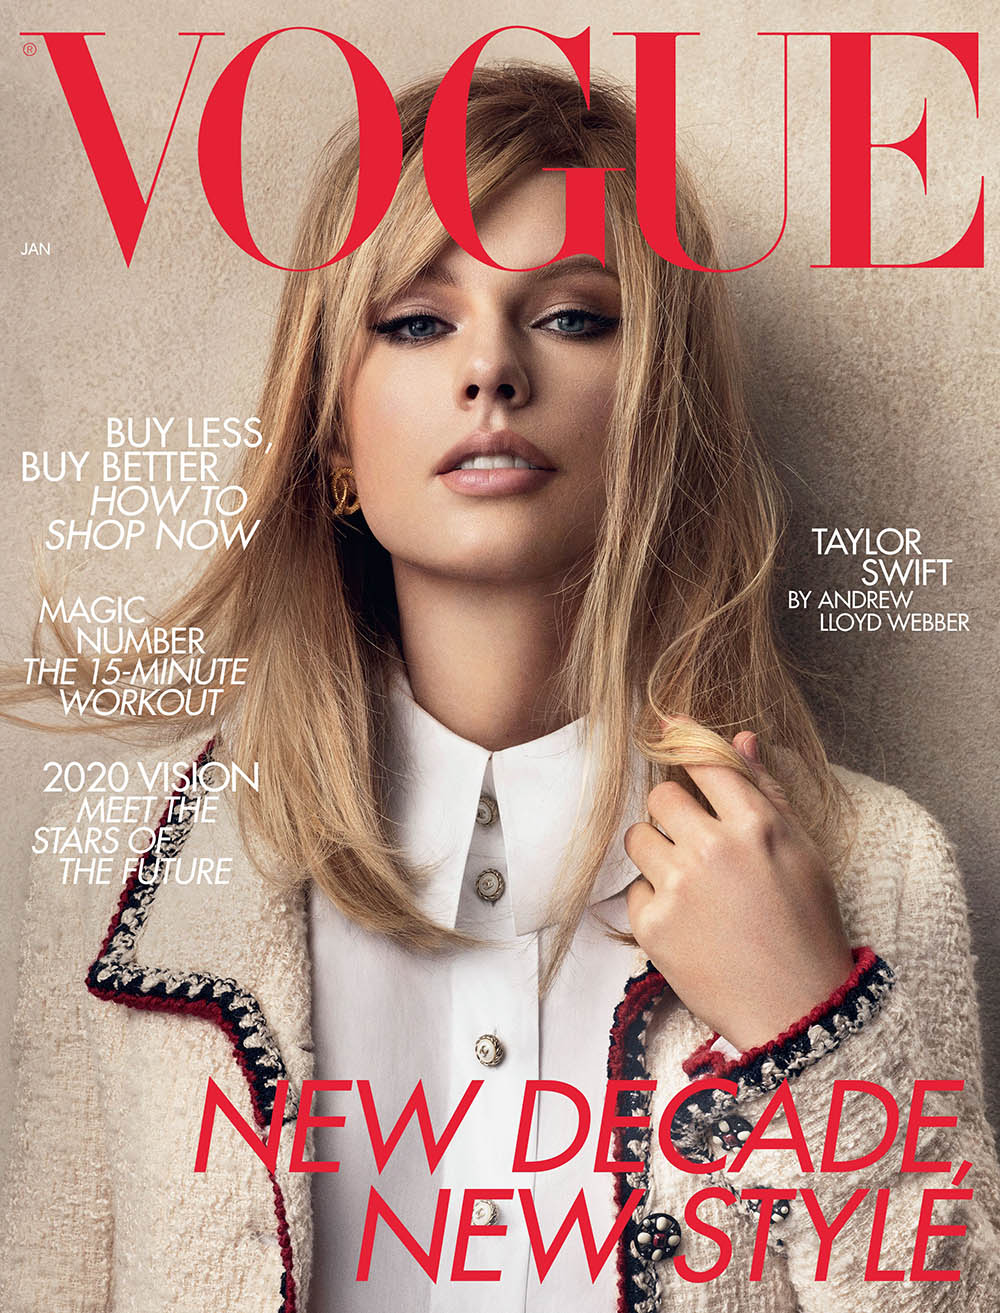 Taylor Swift covers British Vogue January 2020 by Craig McDean